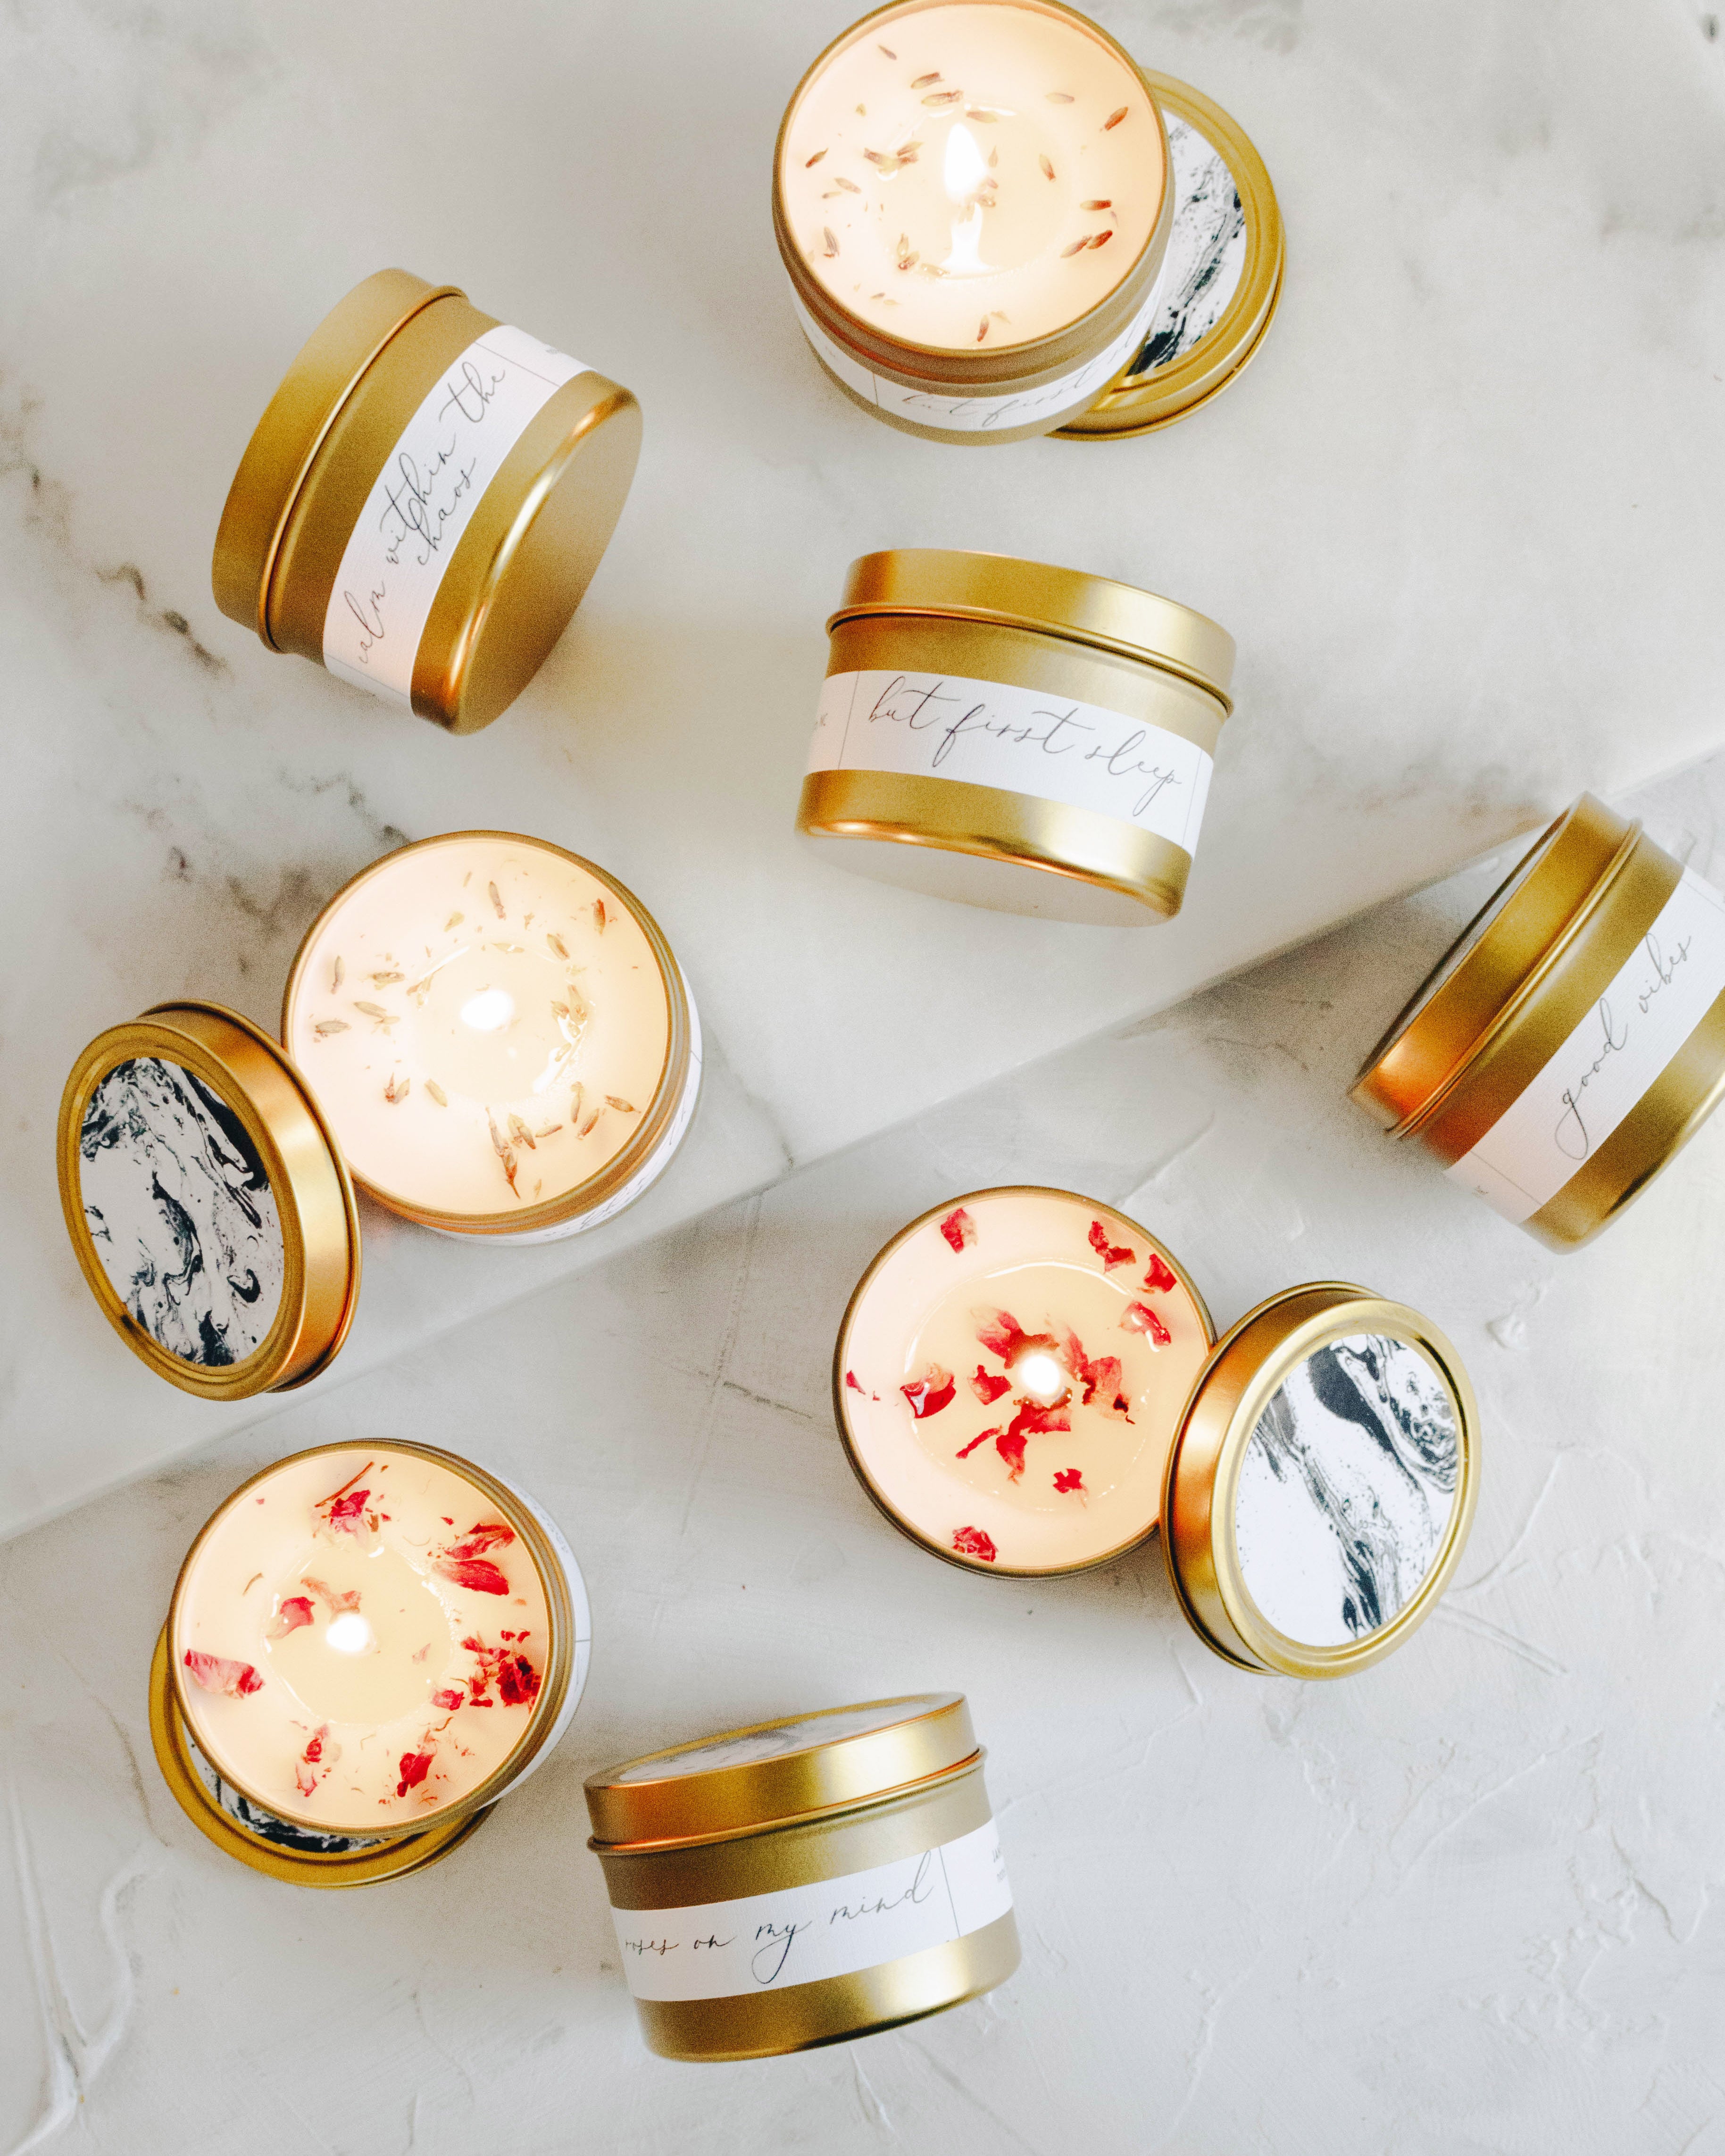 Roses On My Mind Coconut Soy Wax - Gold Travel Tin